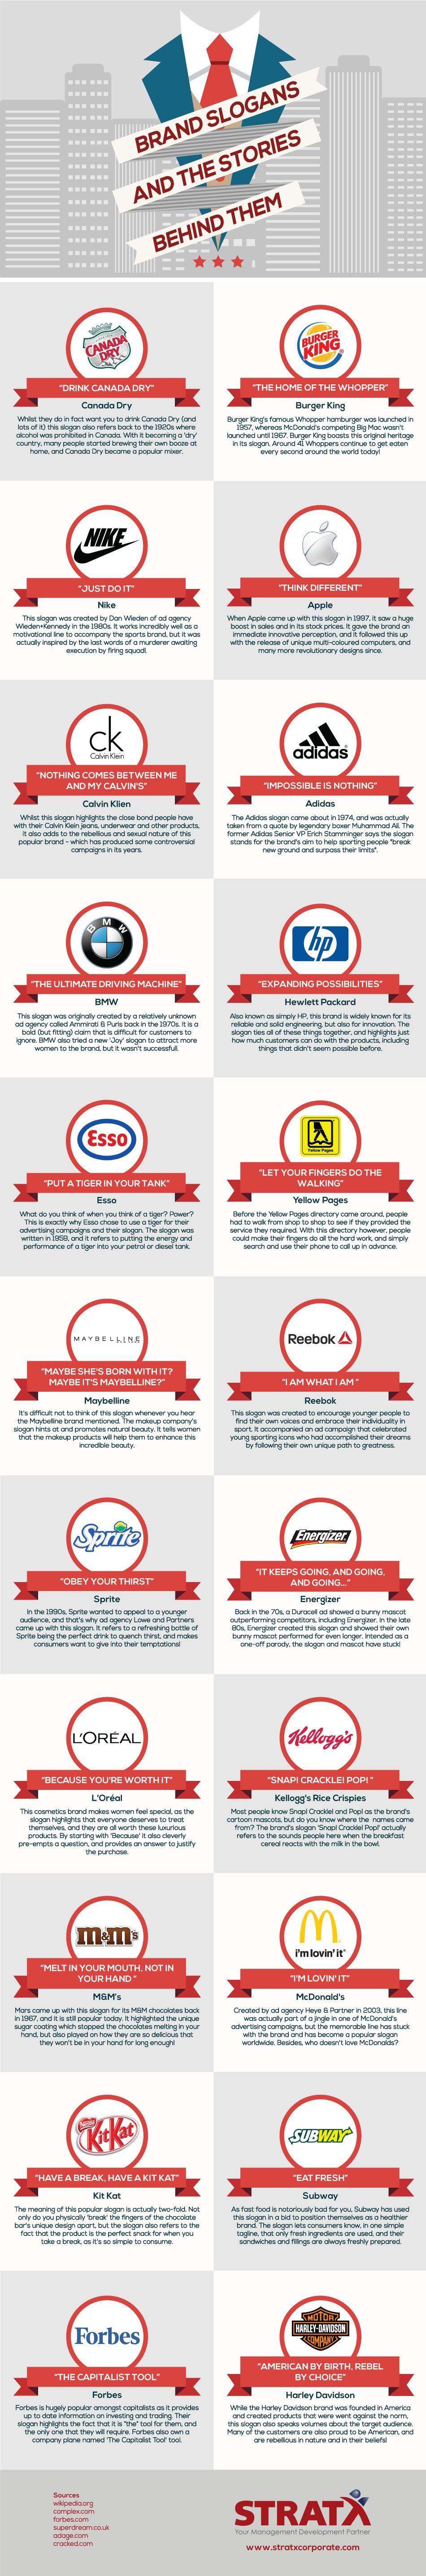 Little Known Company Logo - 22 Famous Brand Slogans (And the Little-Known Stories Behind Them ...